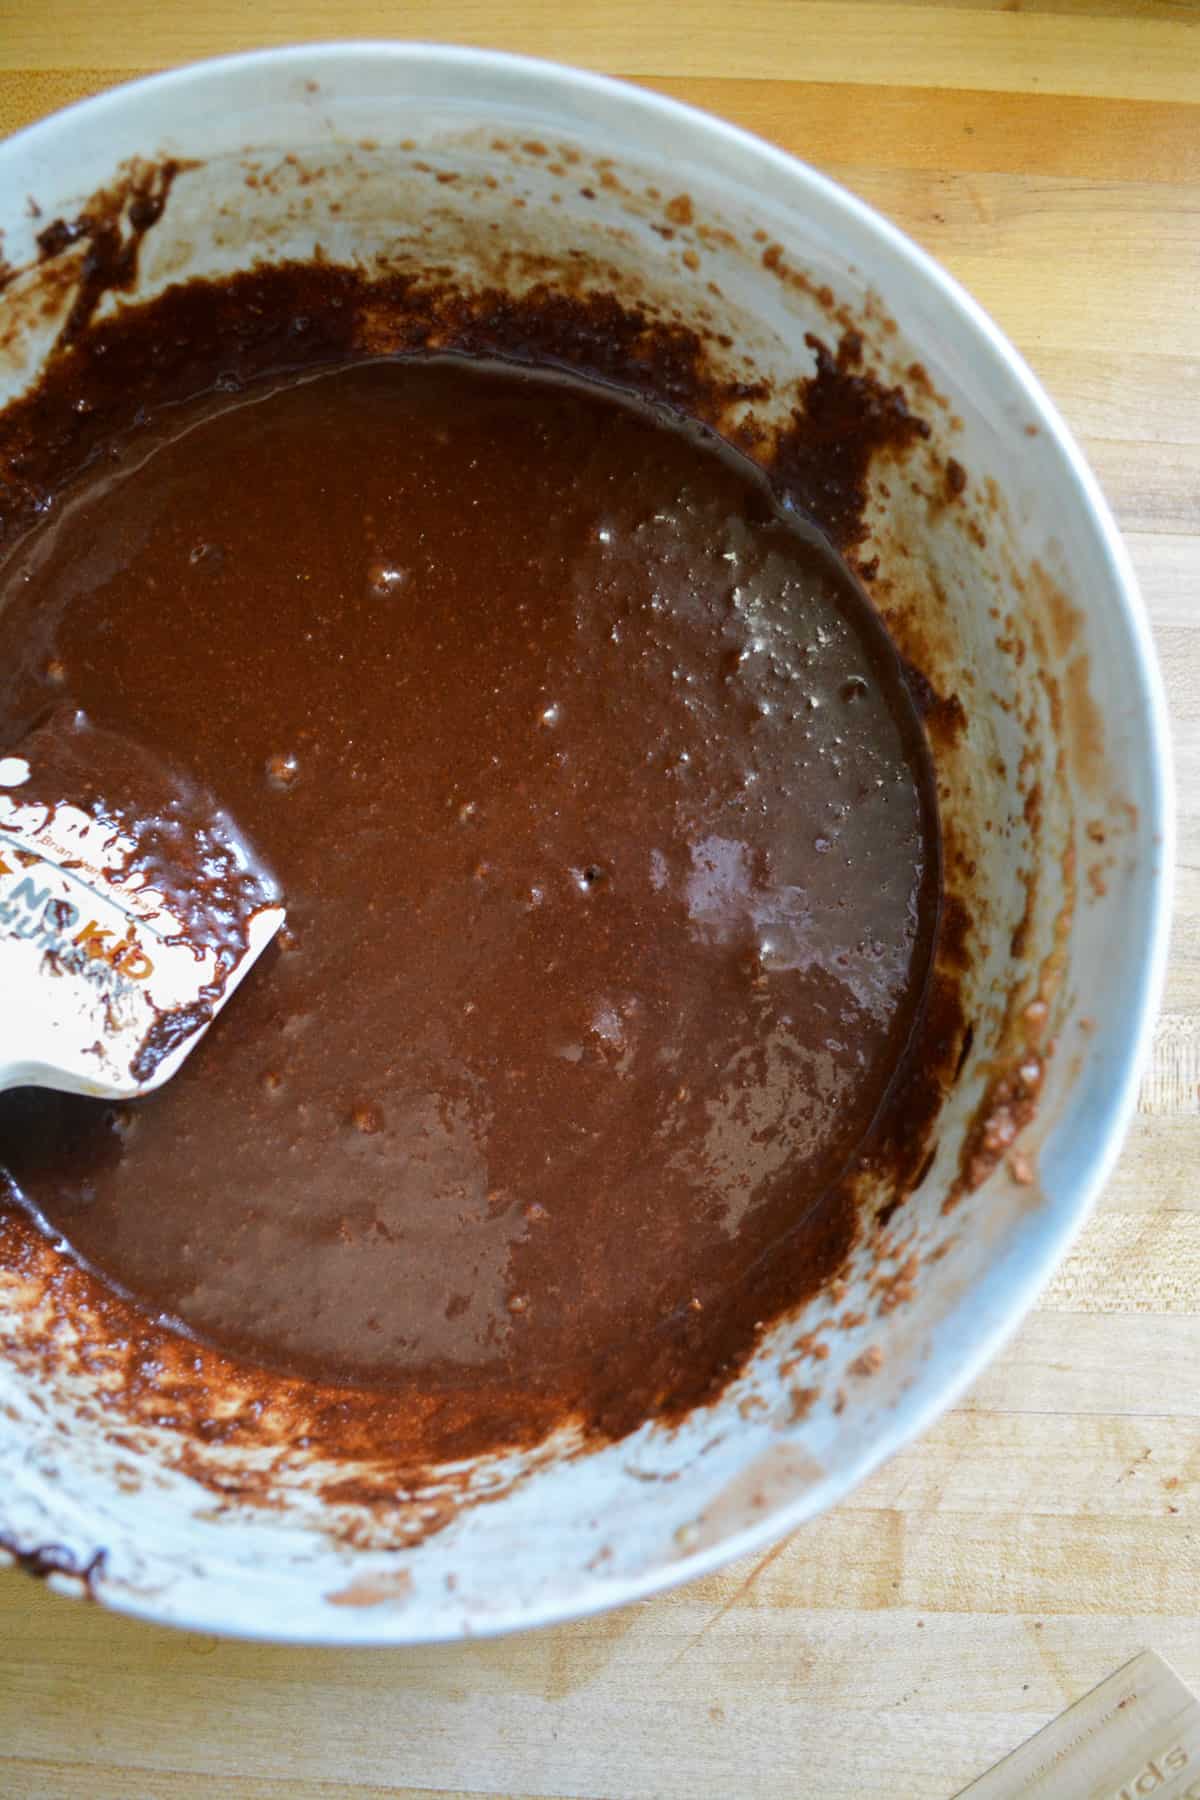 Apple sauce added to the chocolate batter in a mixing bowl.